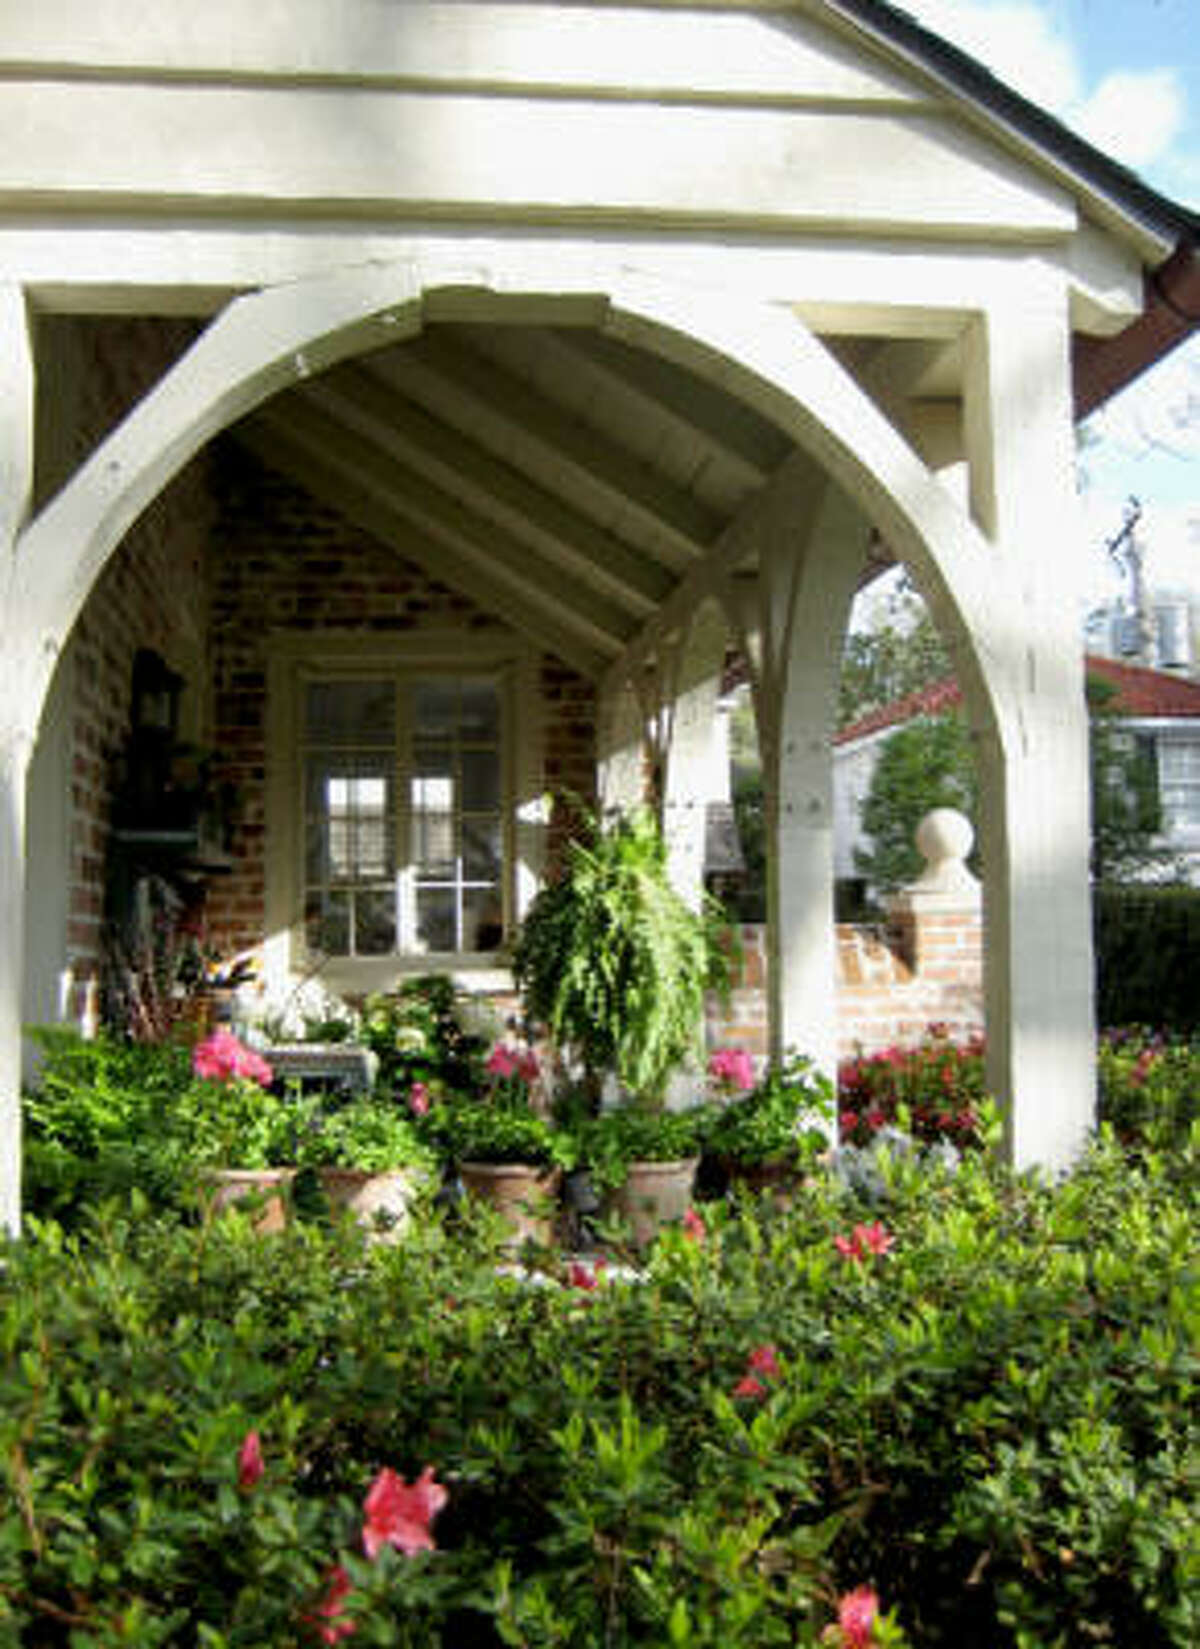 Potting shed at one of the homes on the 2009 Azalea Trail.